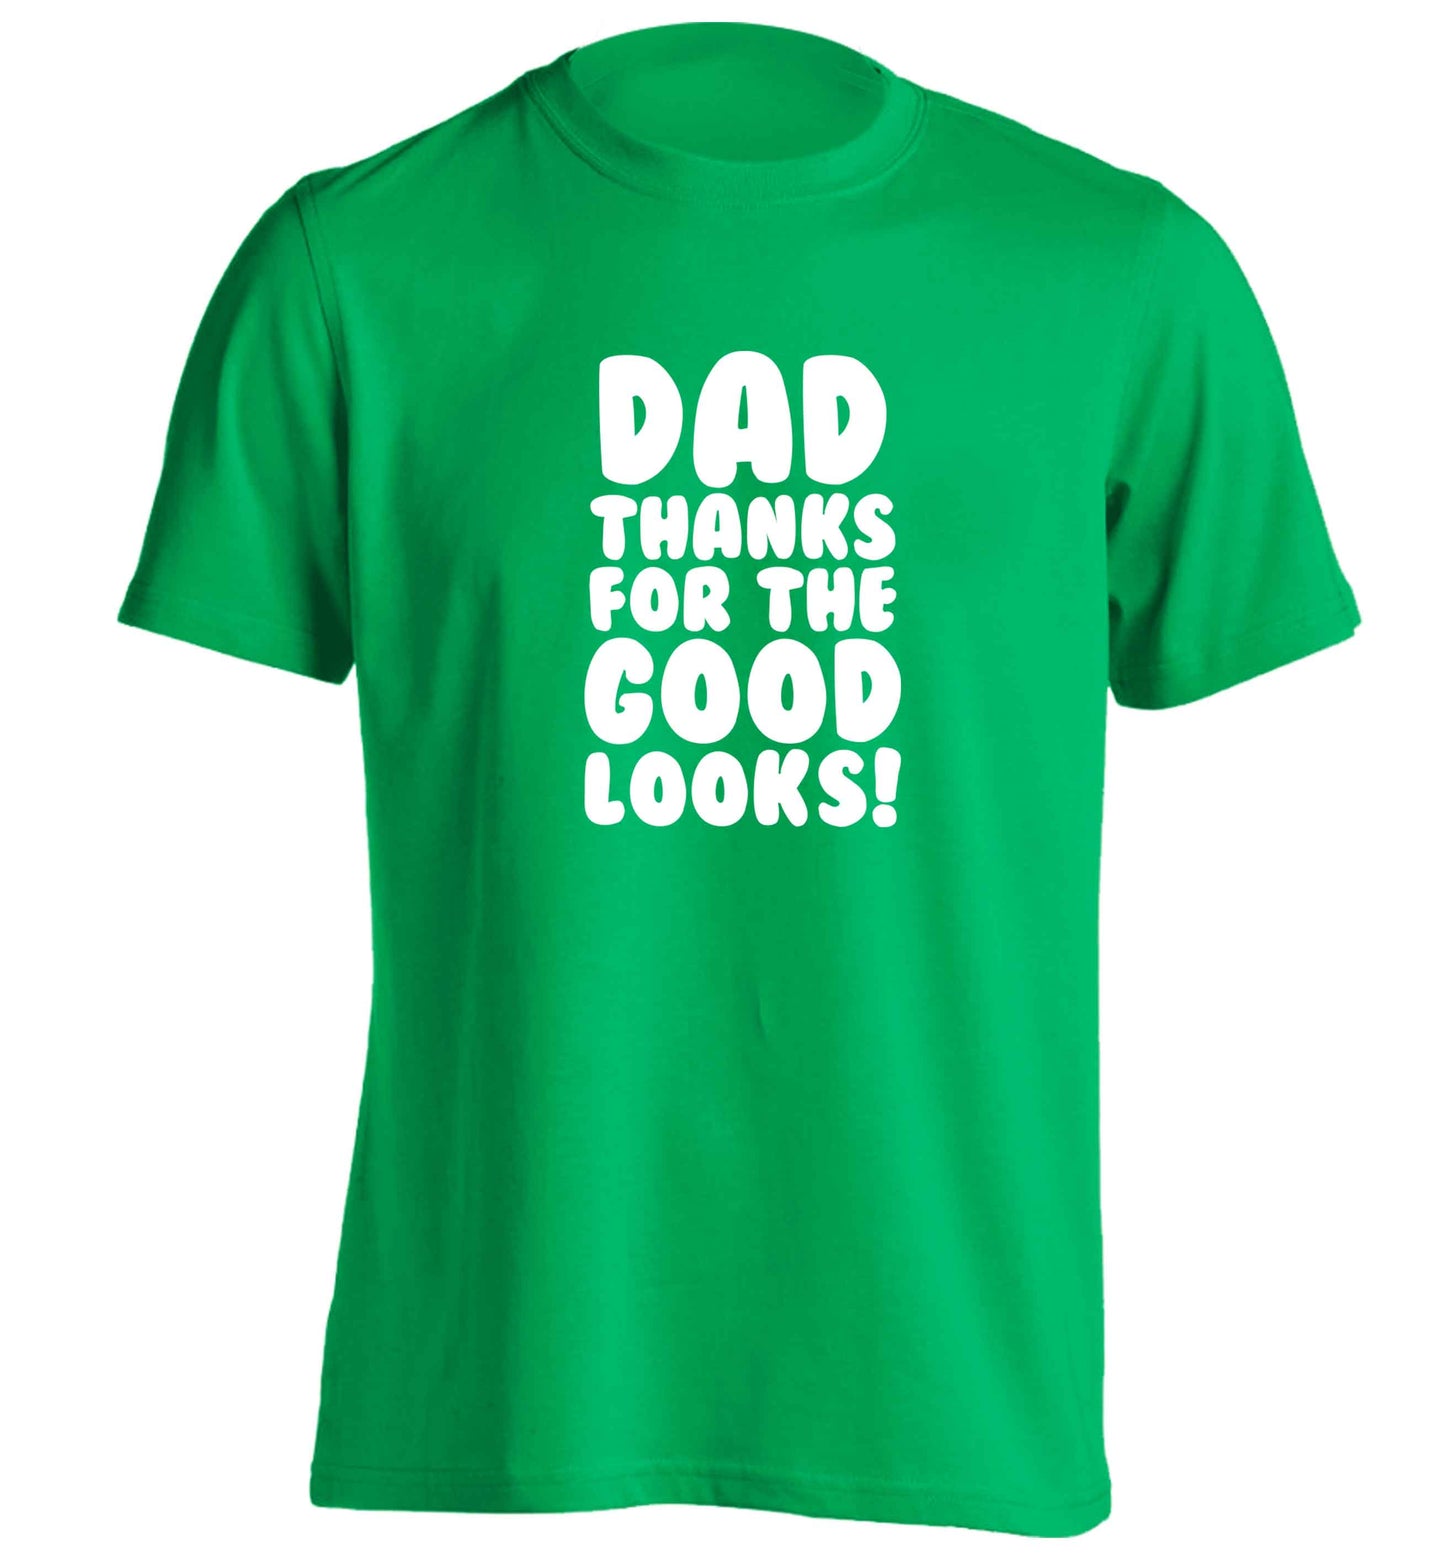 Dad thanks for the good looks adults unisex green Tshirt 2XL